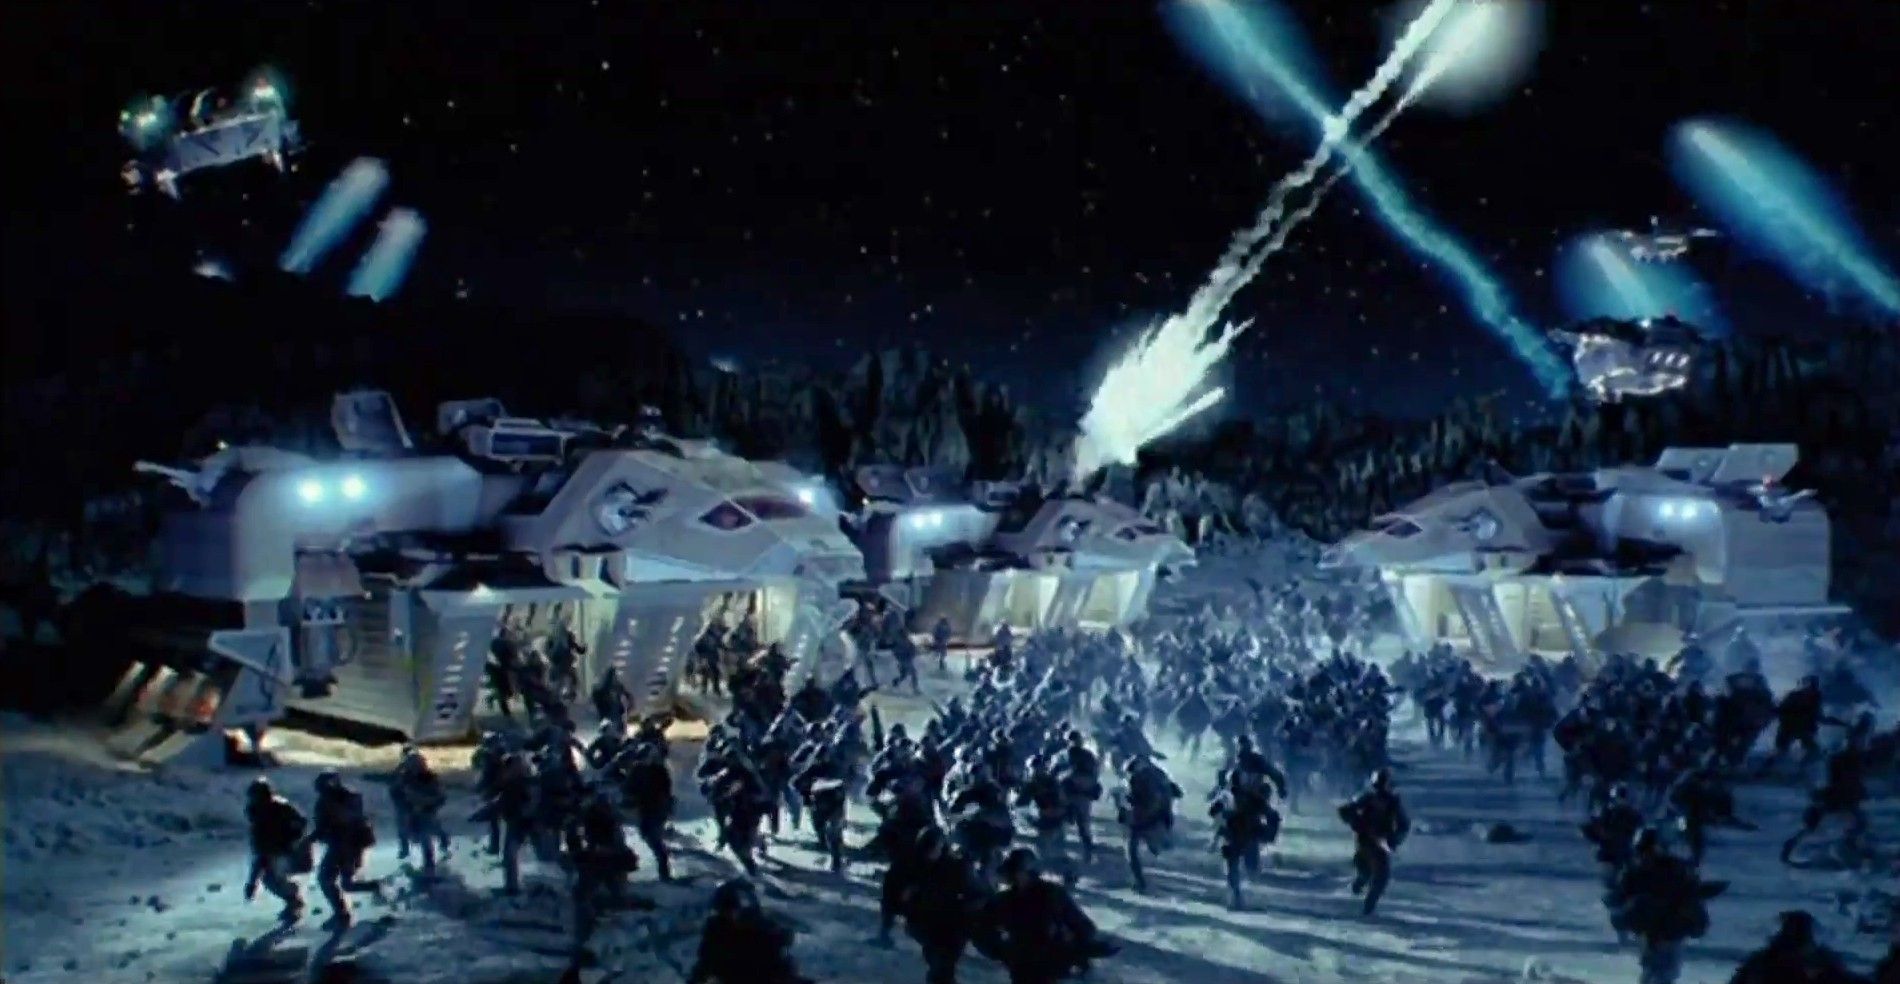 Free download Starship Troopers Wallpapers 4 1900 X 984 stmednet.